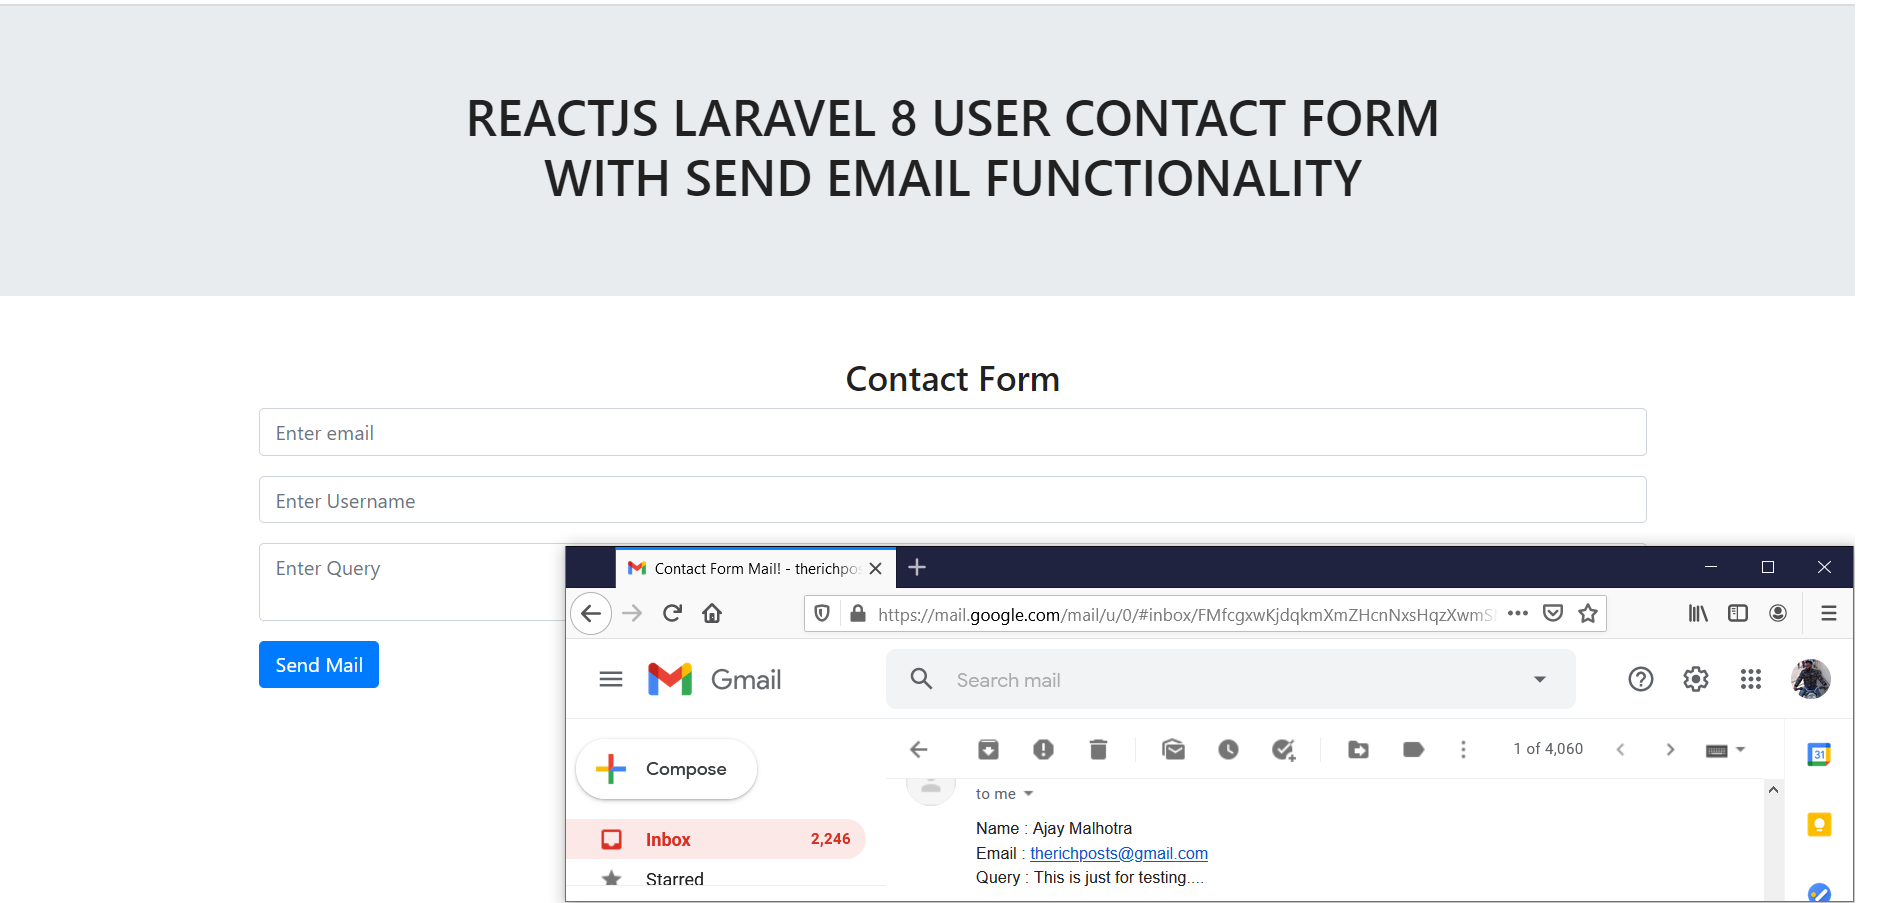 Reactjs Laravel 8 User Contact Form with Send Email Functionality